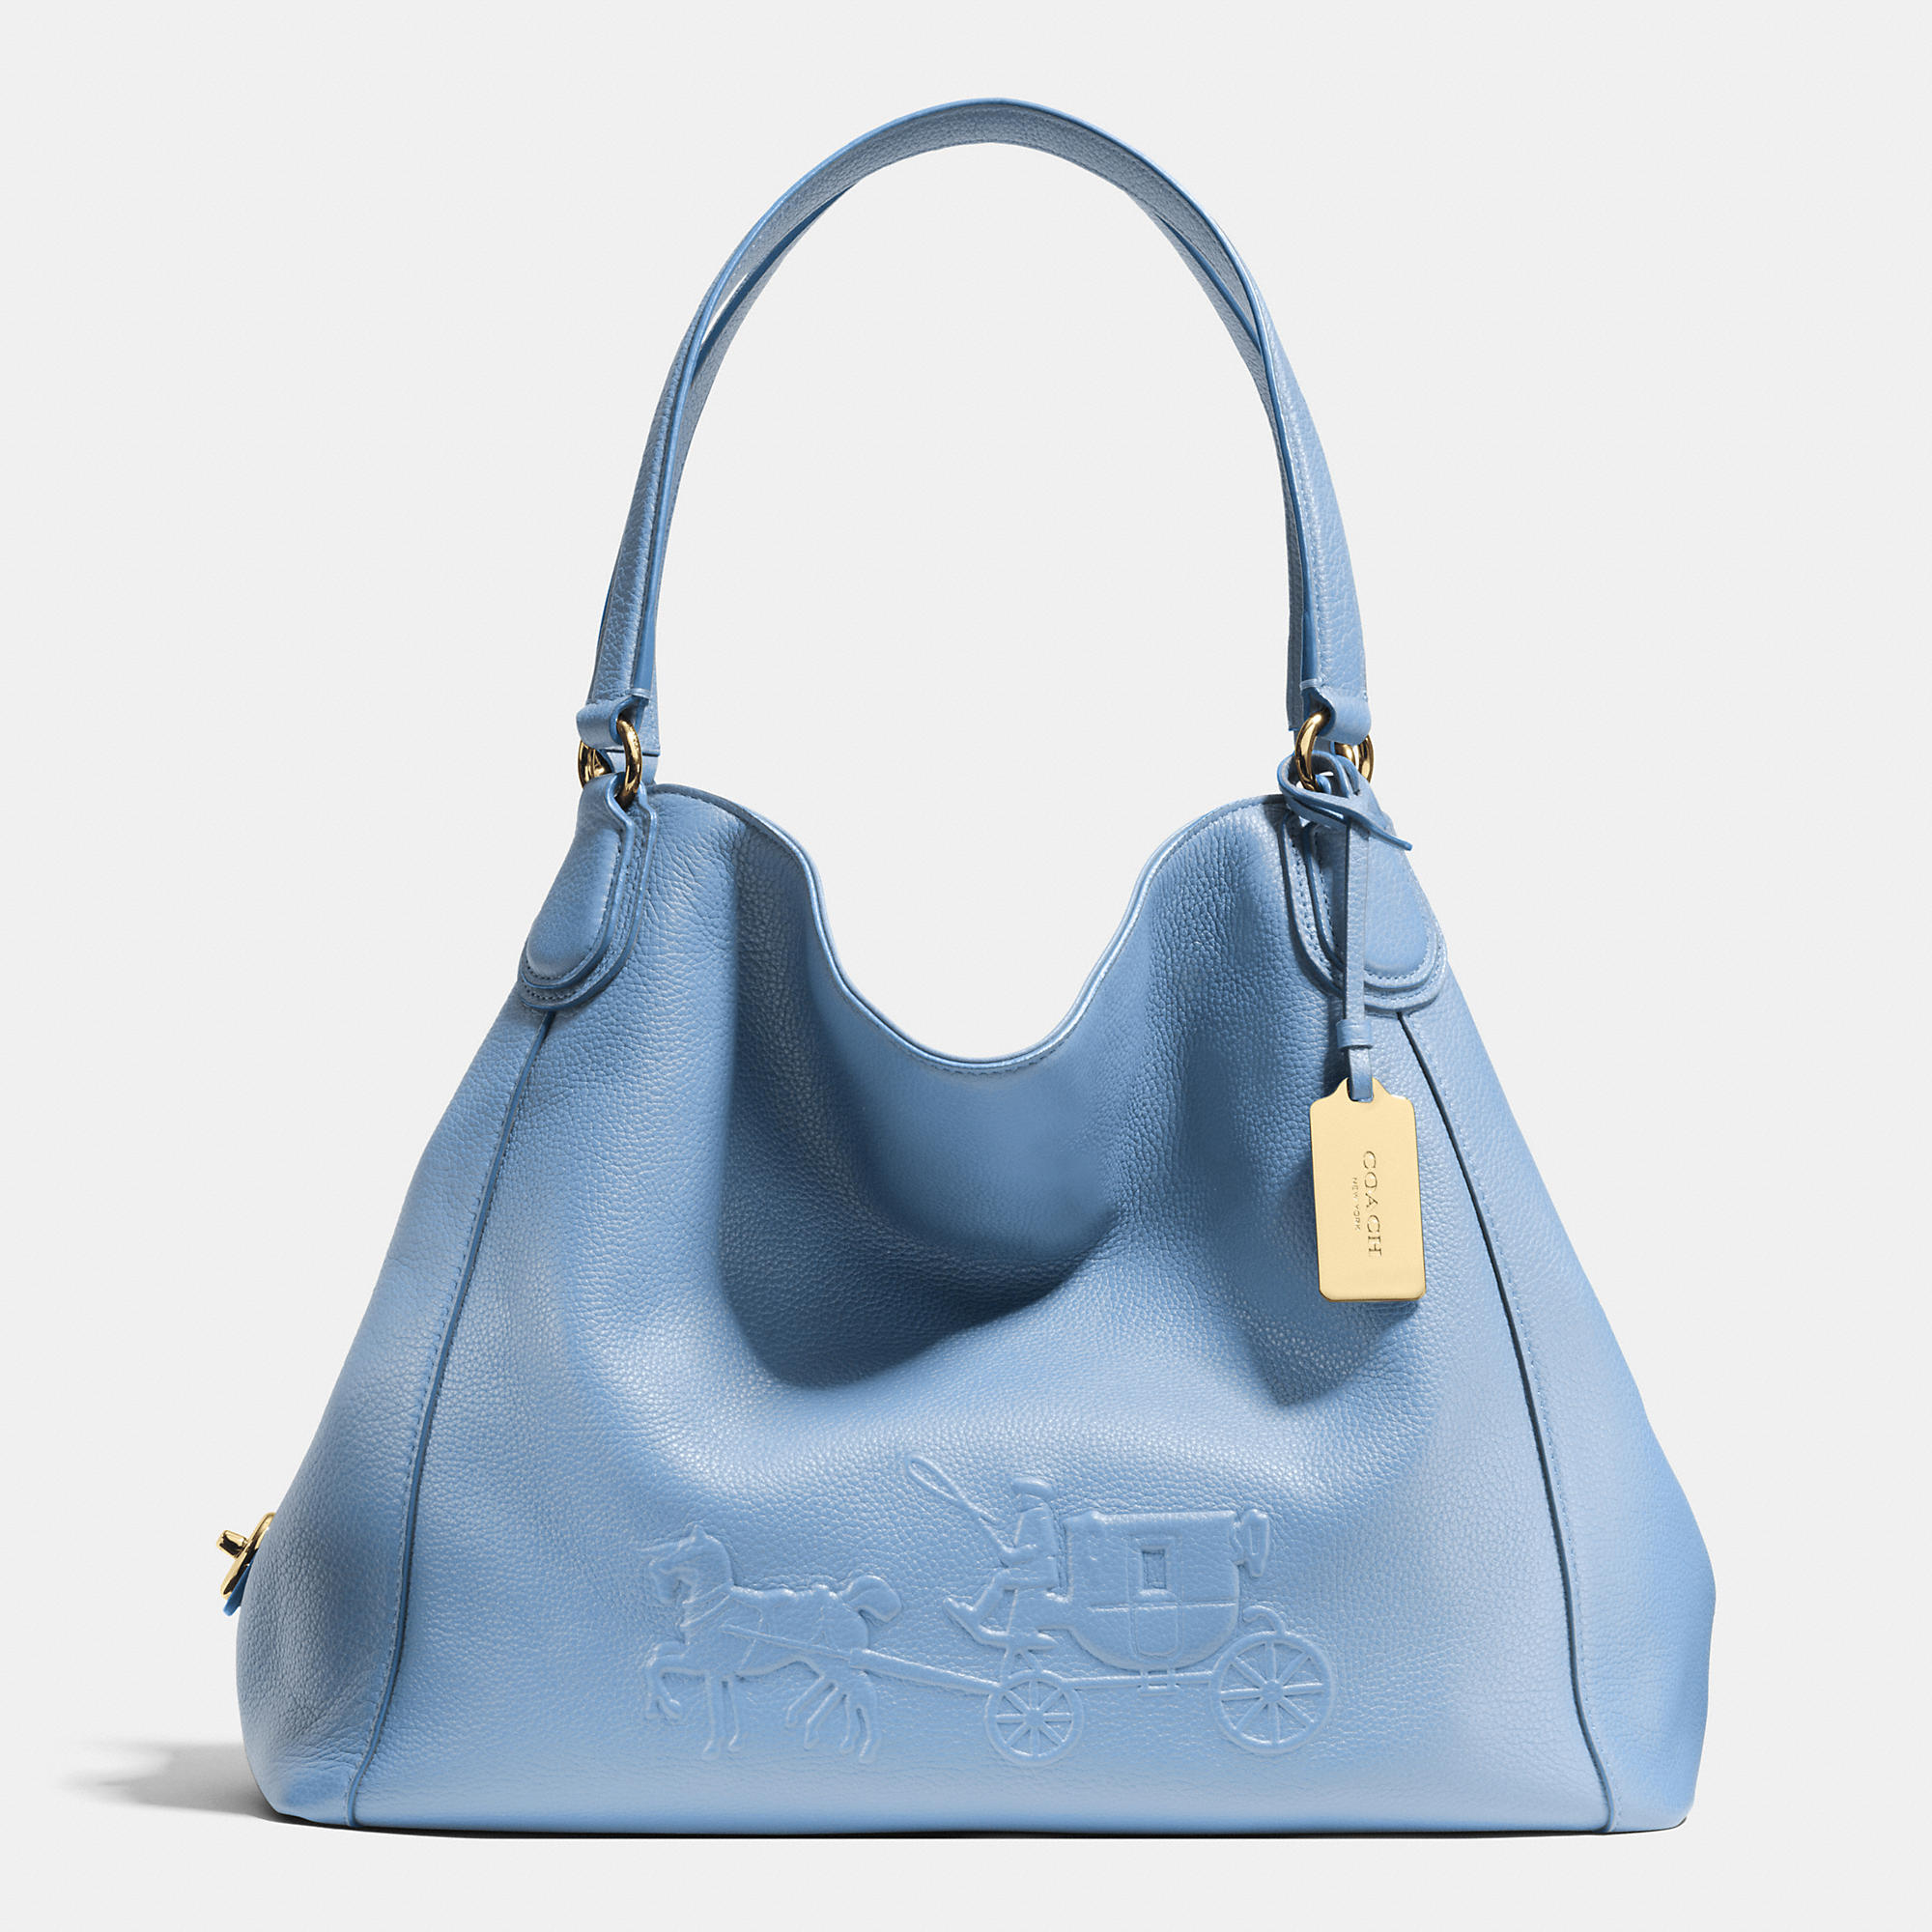 COACH Embossed Horse And Carriage Edie Shoulder Bag In Pebbled